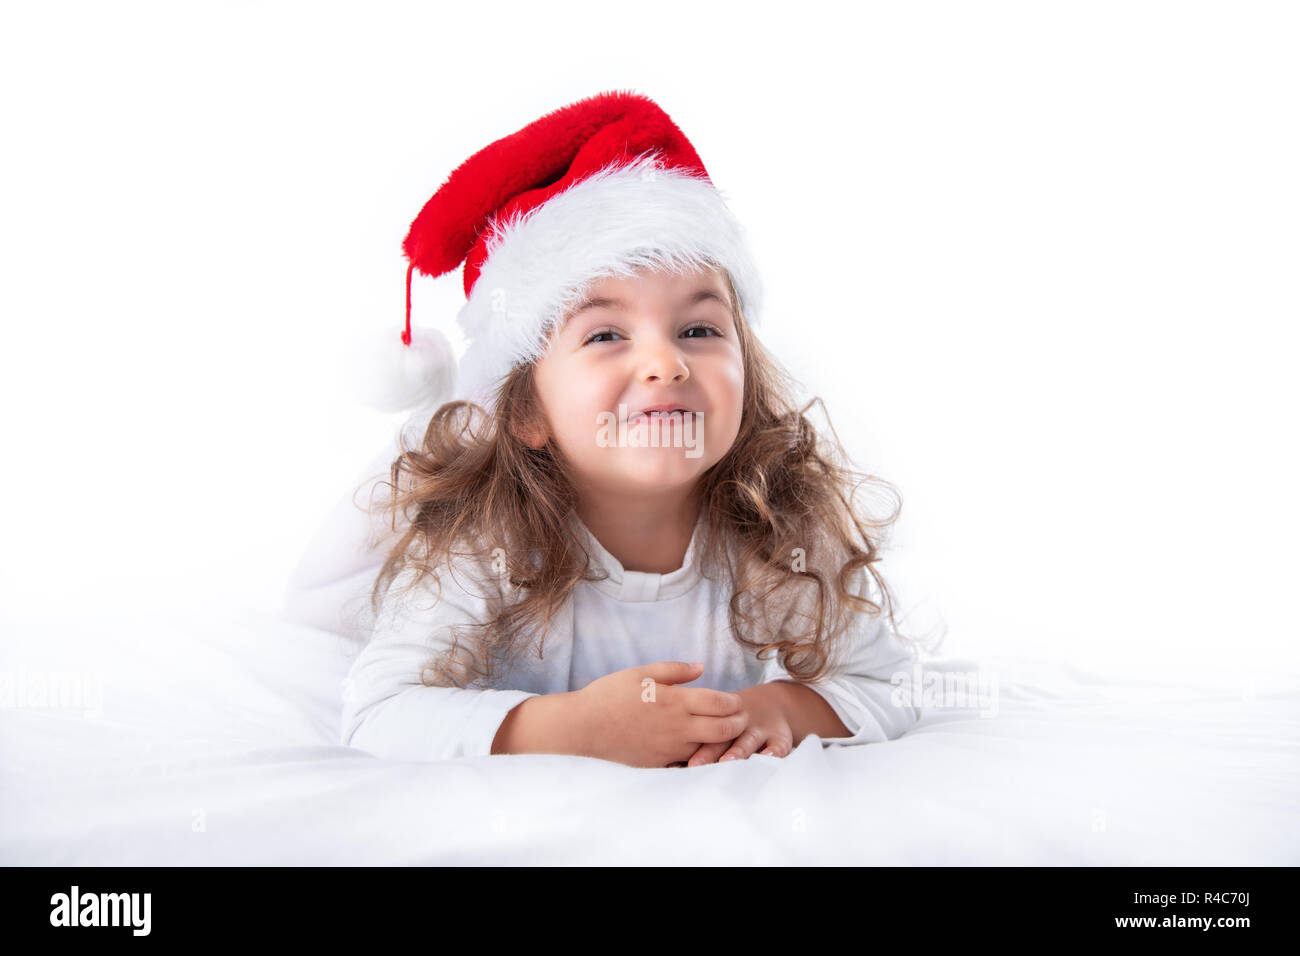 Christmas time, little girl in Santa Claus hat smilling. Stock Photo